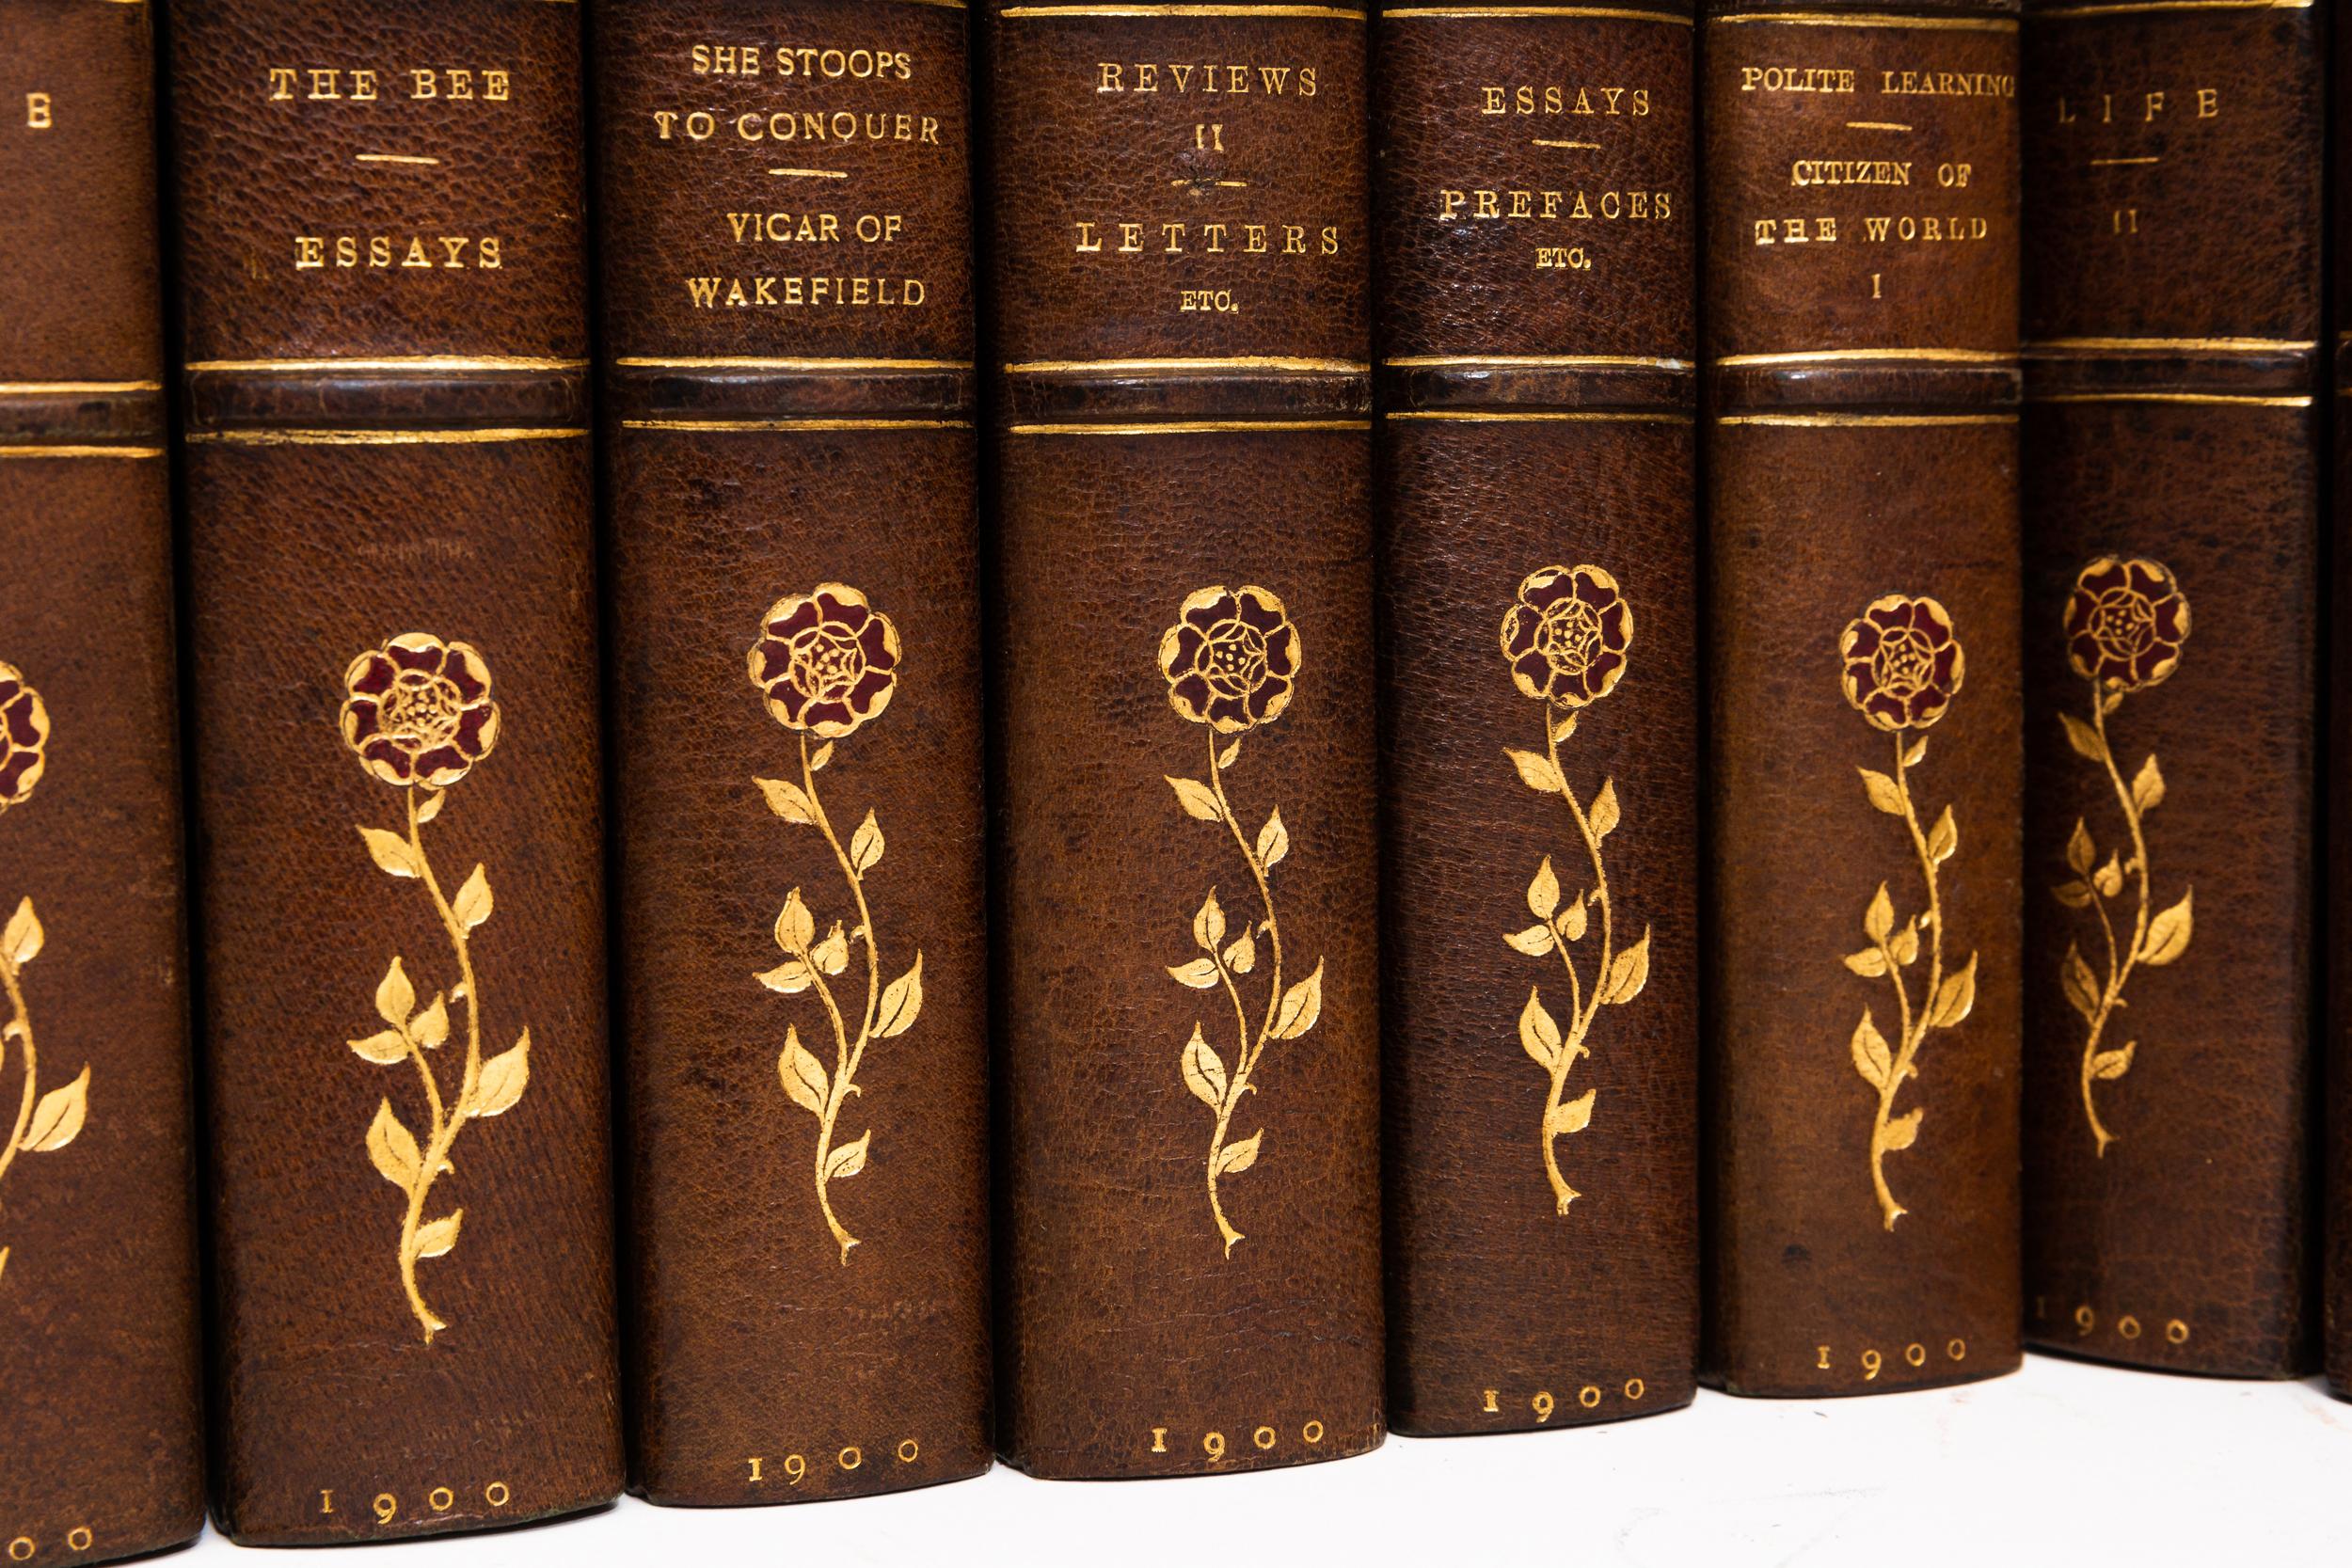 12 Volumes. Oliver Goldsmith, The Works of Oliver Goldsmith. Bound in 3/4 green morocco. Marbled boards. Raised bands. Top edges gilt. Floral gilt symbols on spines. Marbled endpapers. Illustrated. Library Edition. Published: New York; Harper &